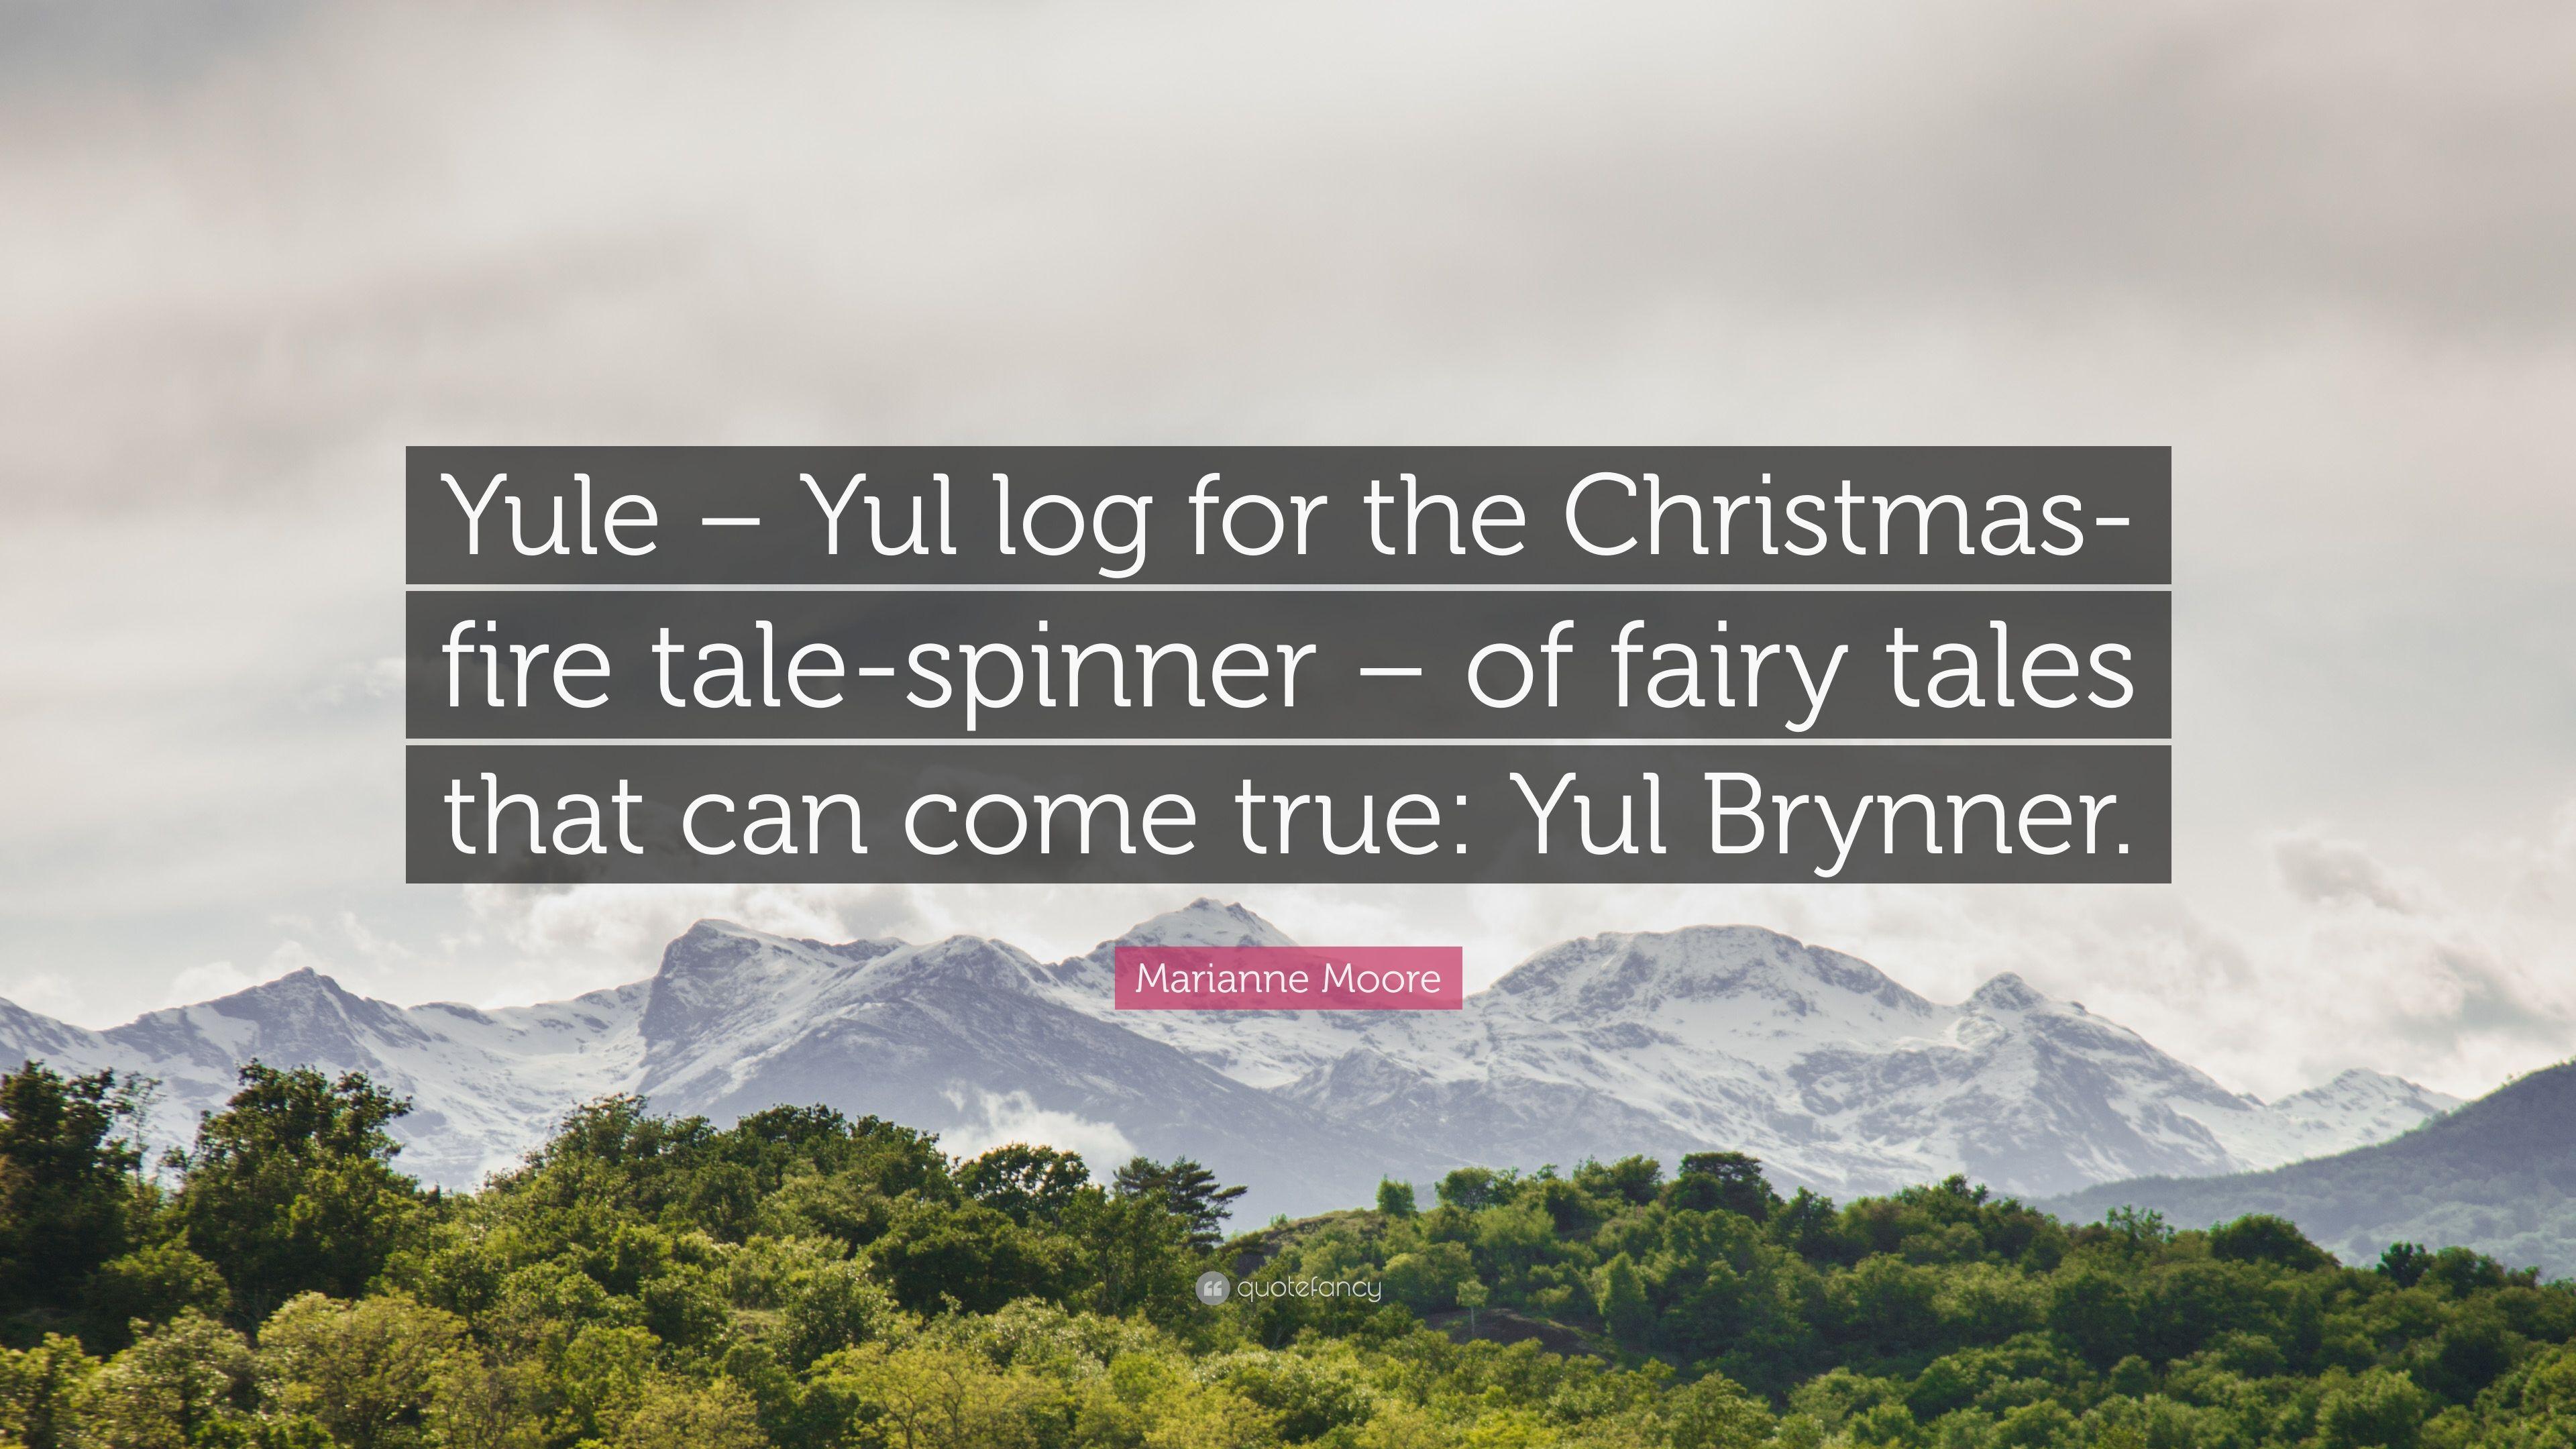 Marianne Moore Quote: “Yule